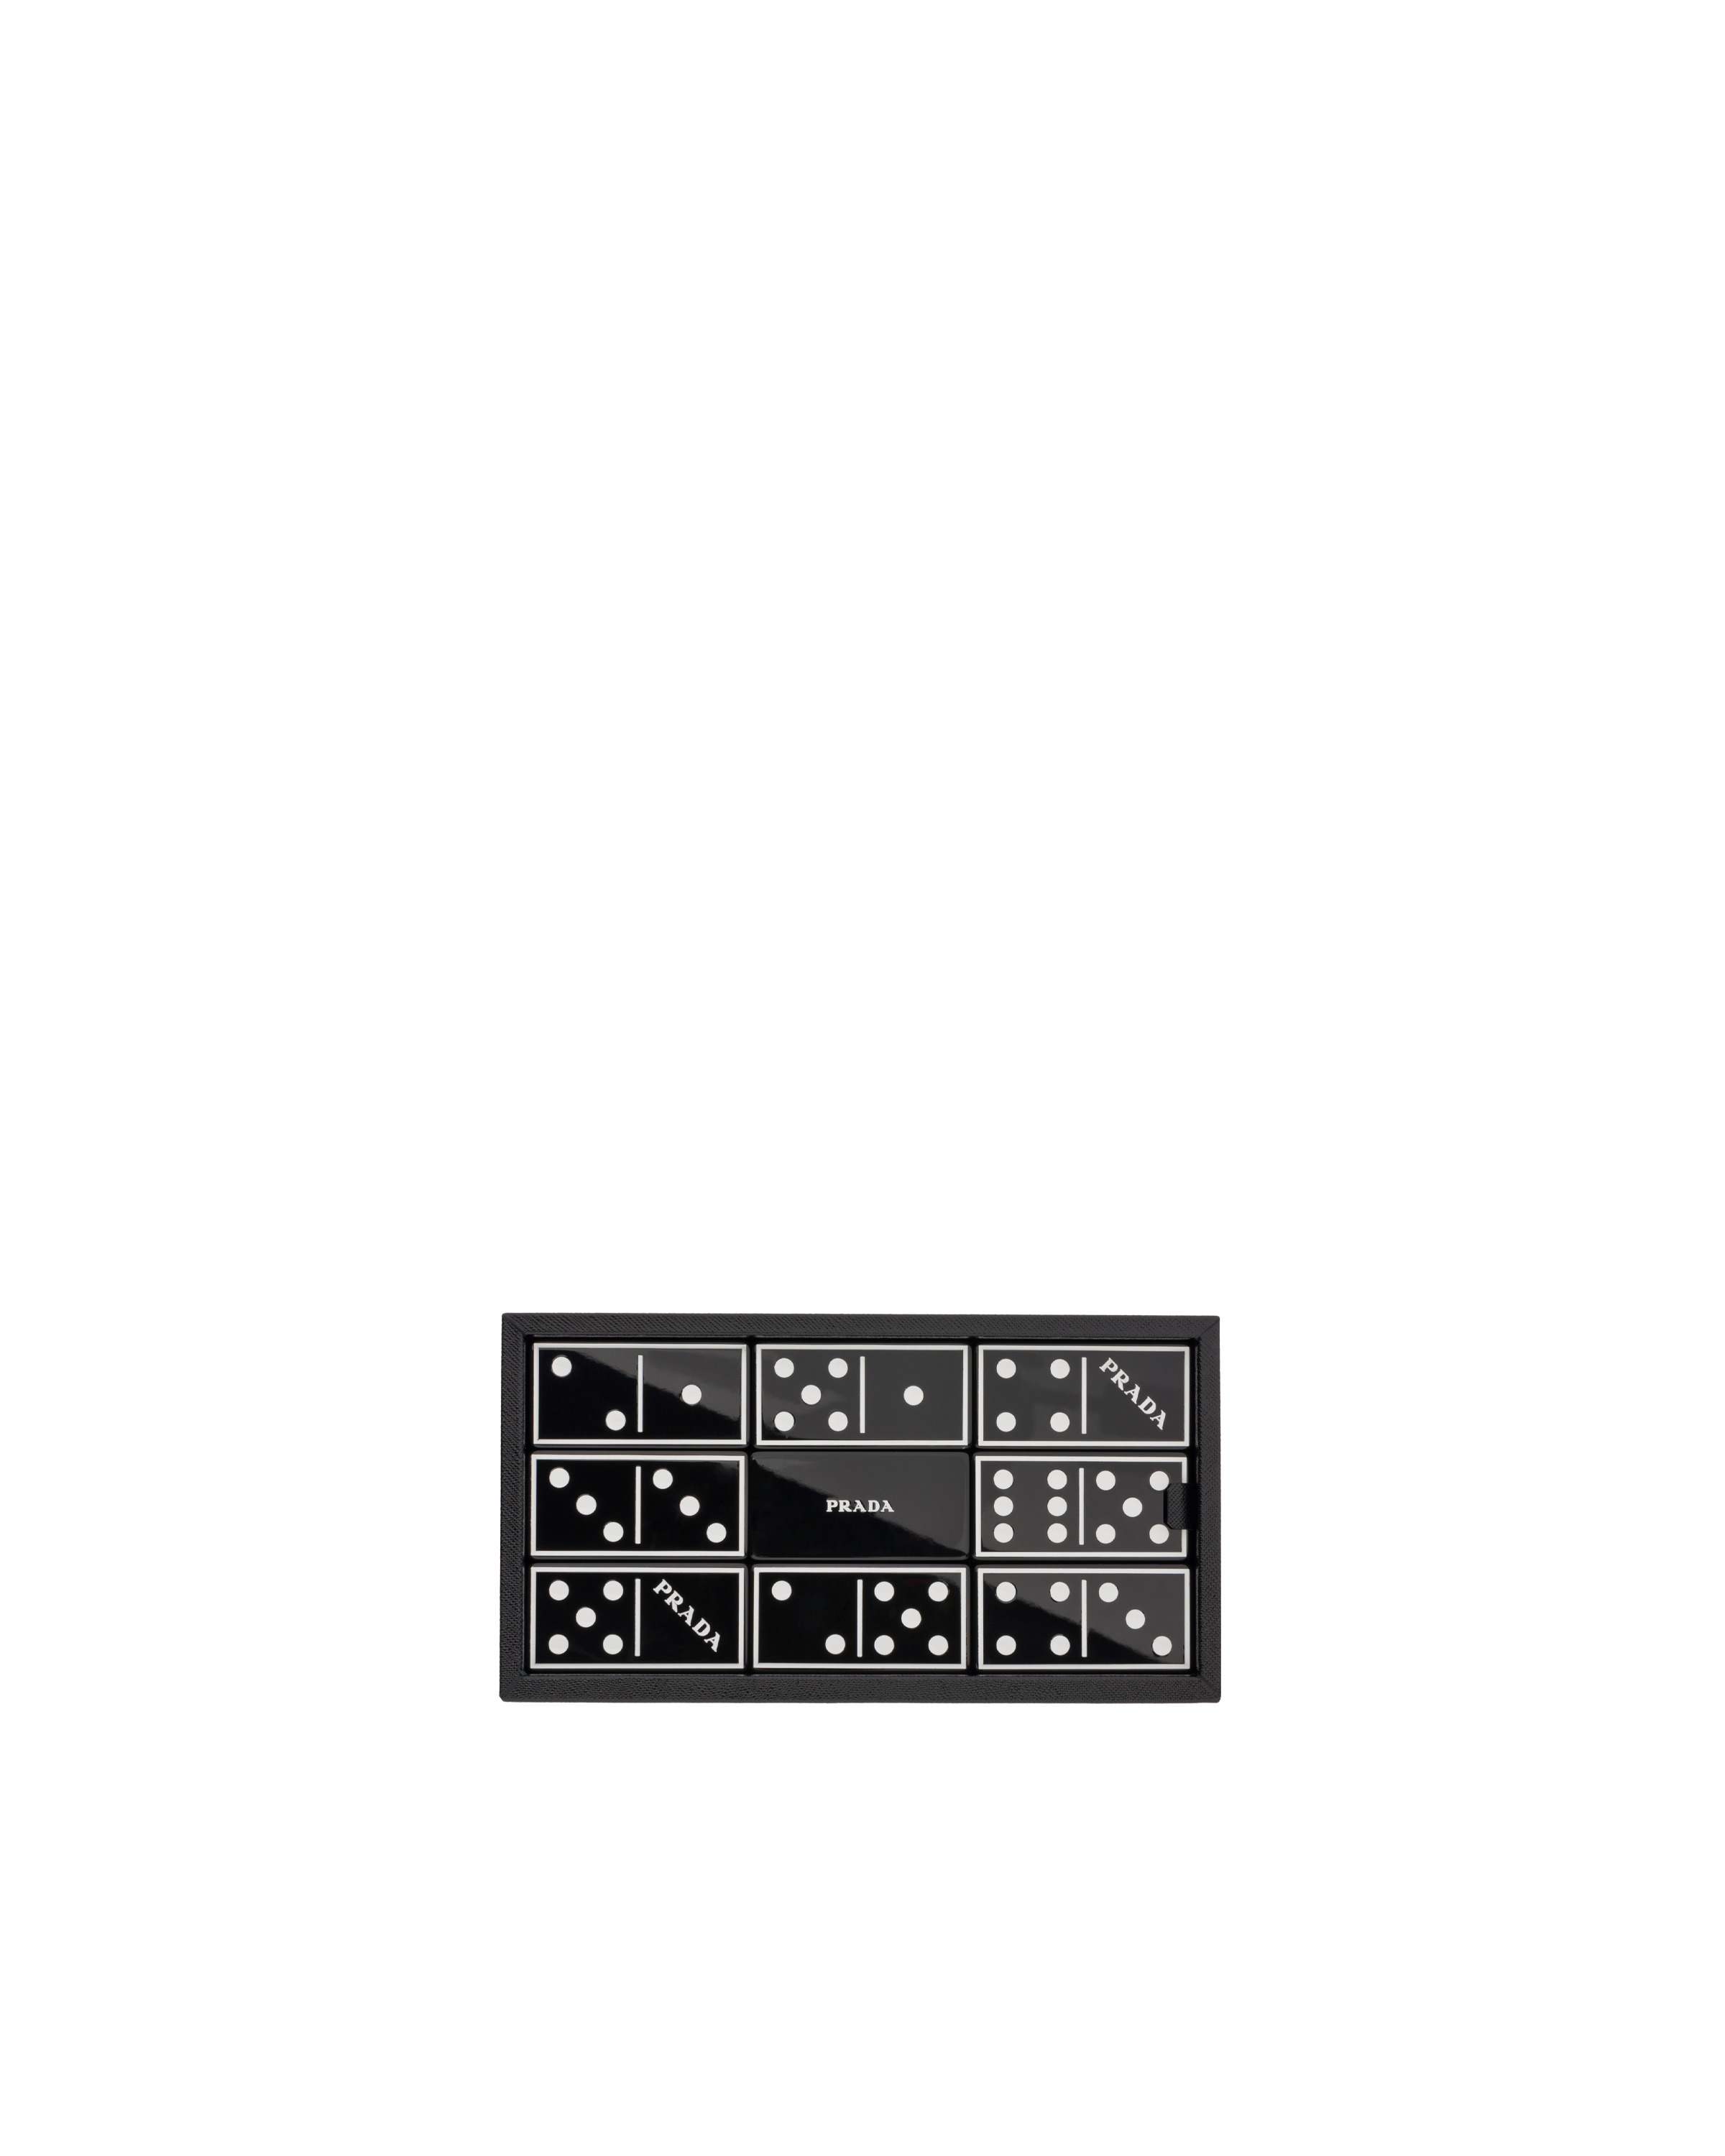 Saffiano leather Dominoes set - 2